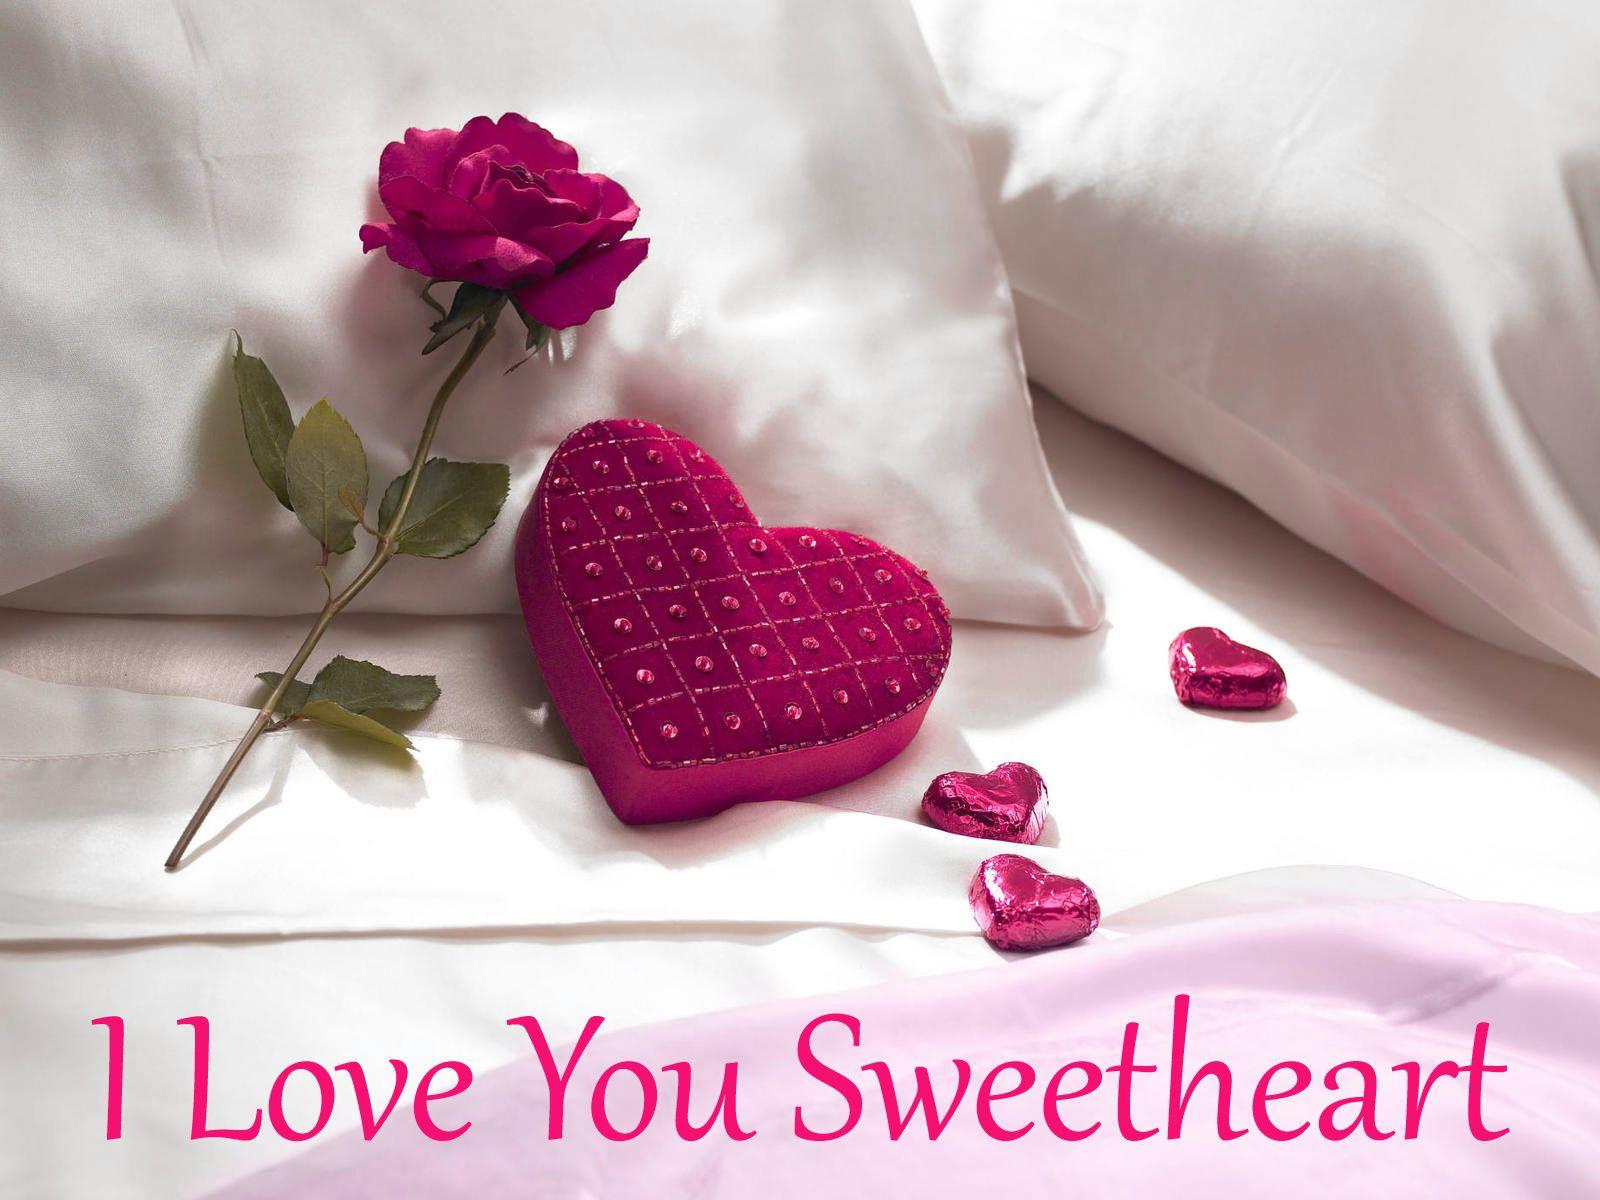 Cute I Love U Wallpaper For Mobile image picture. Free